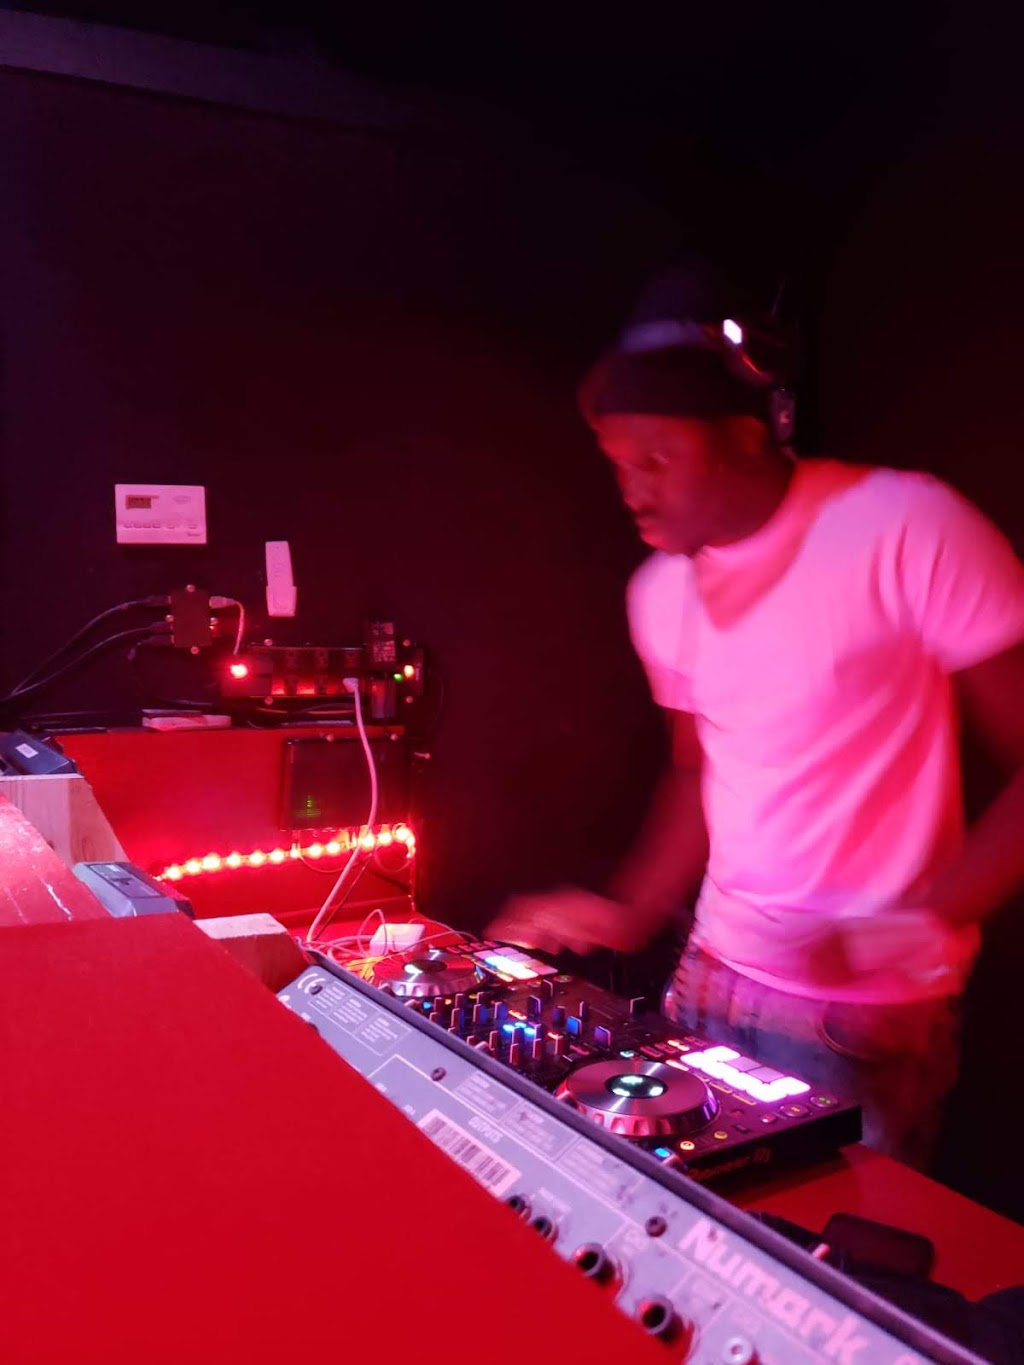 Haitian DJs Connection | 10428 94th Ave, Queens, NY 11416 | Phone: (561) 789-3647